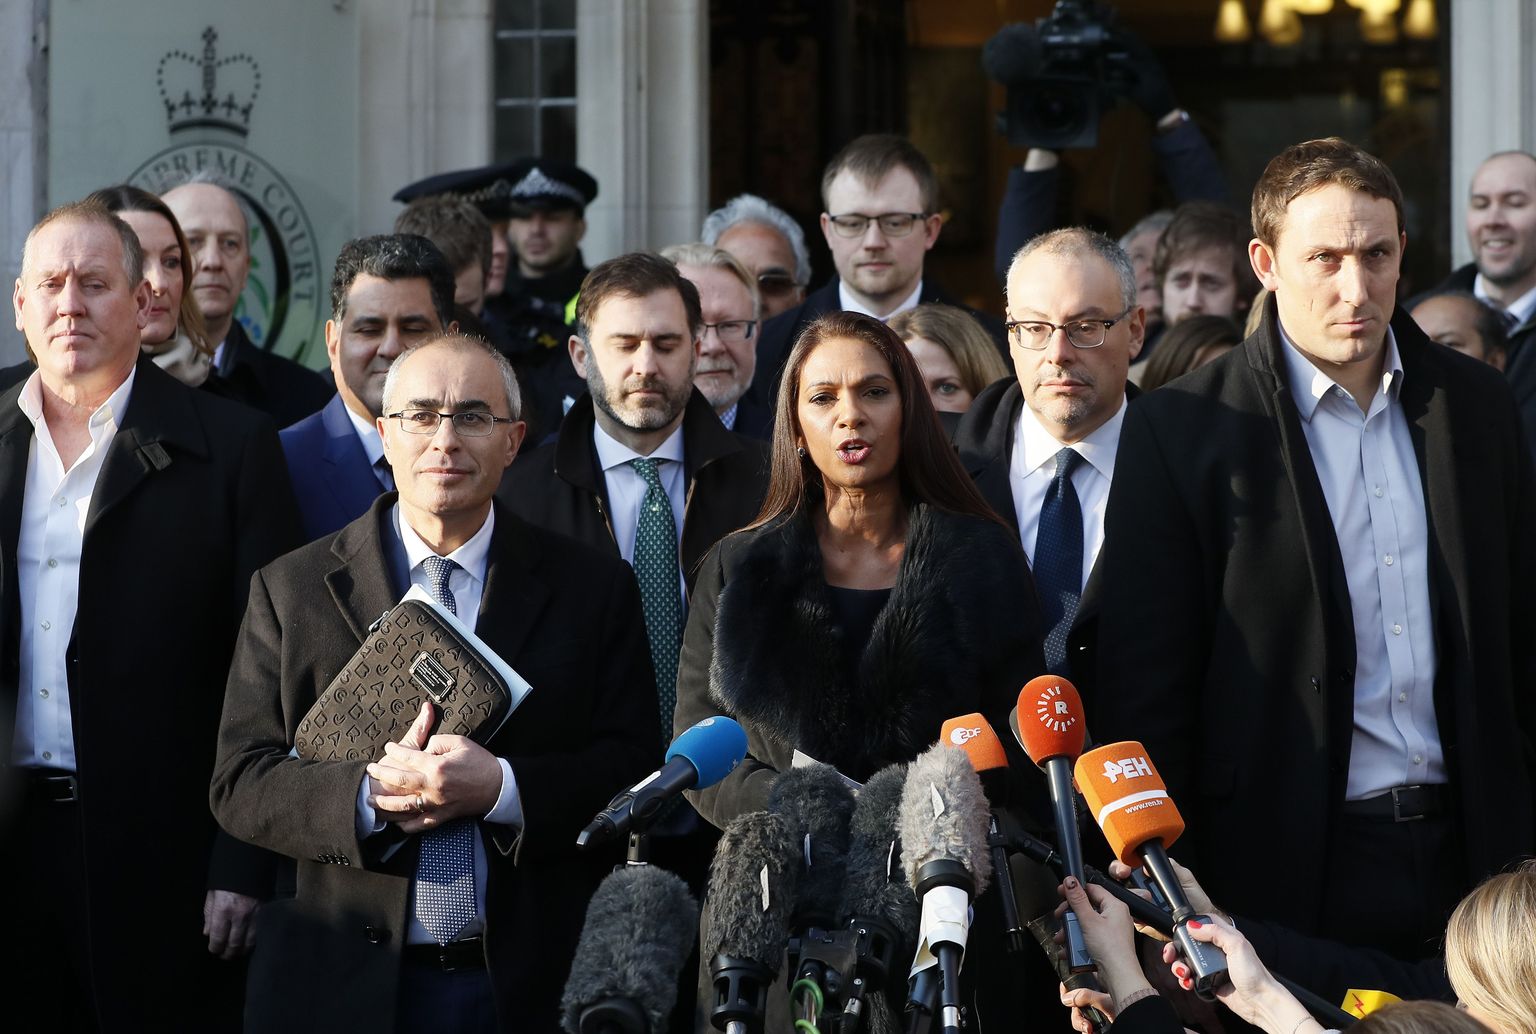 Gina Miller, the lead claimant in the legal fight to get Parliament to vote on whether the UK can start the process of leaving the EU, makes a statement outside the Supreme Court in London, Tuesday, Jan. 24, 2017. Lead plaintiff Gina Miller says British Supreme Court ruling provides the legal foundation to trigger Brexit. (AP Photo/Kirsty Wigglesworth)